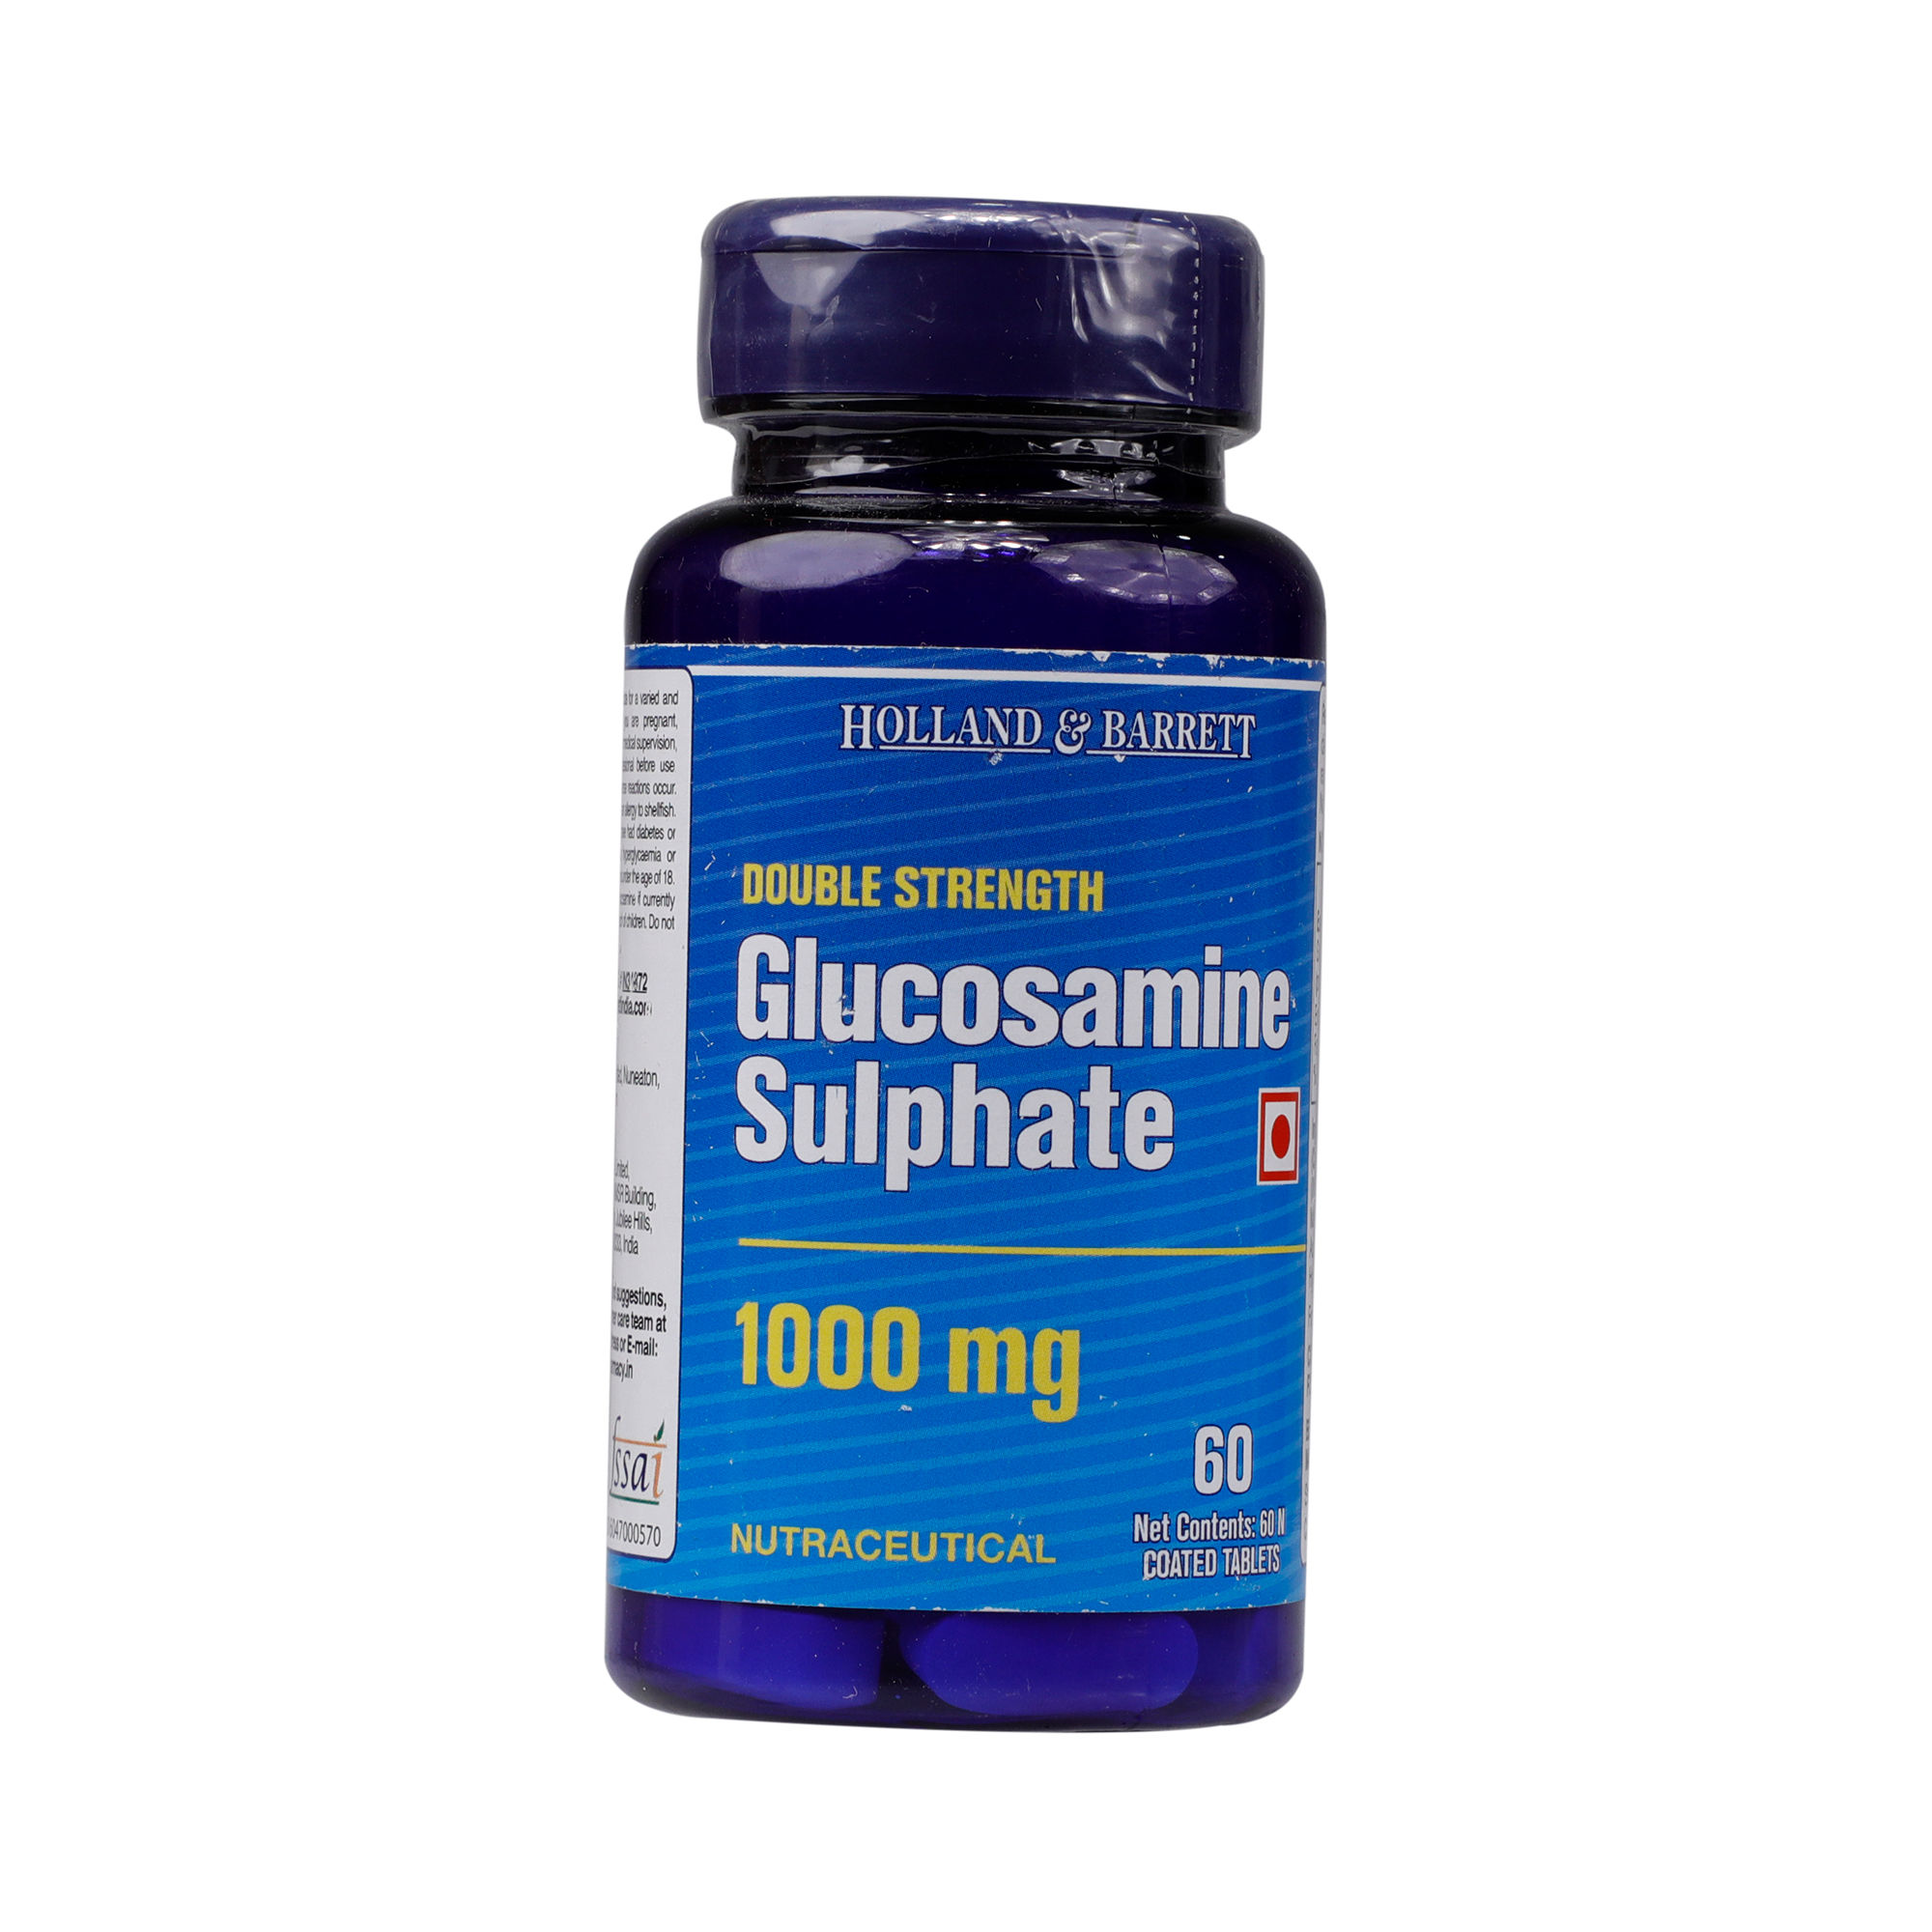 Buy Holland & Barrett Double Strength Glucosamine Sulphate 1000 mg, 60 Capsules Online